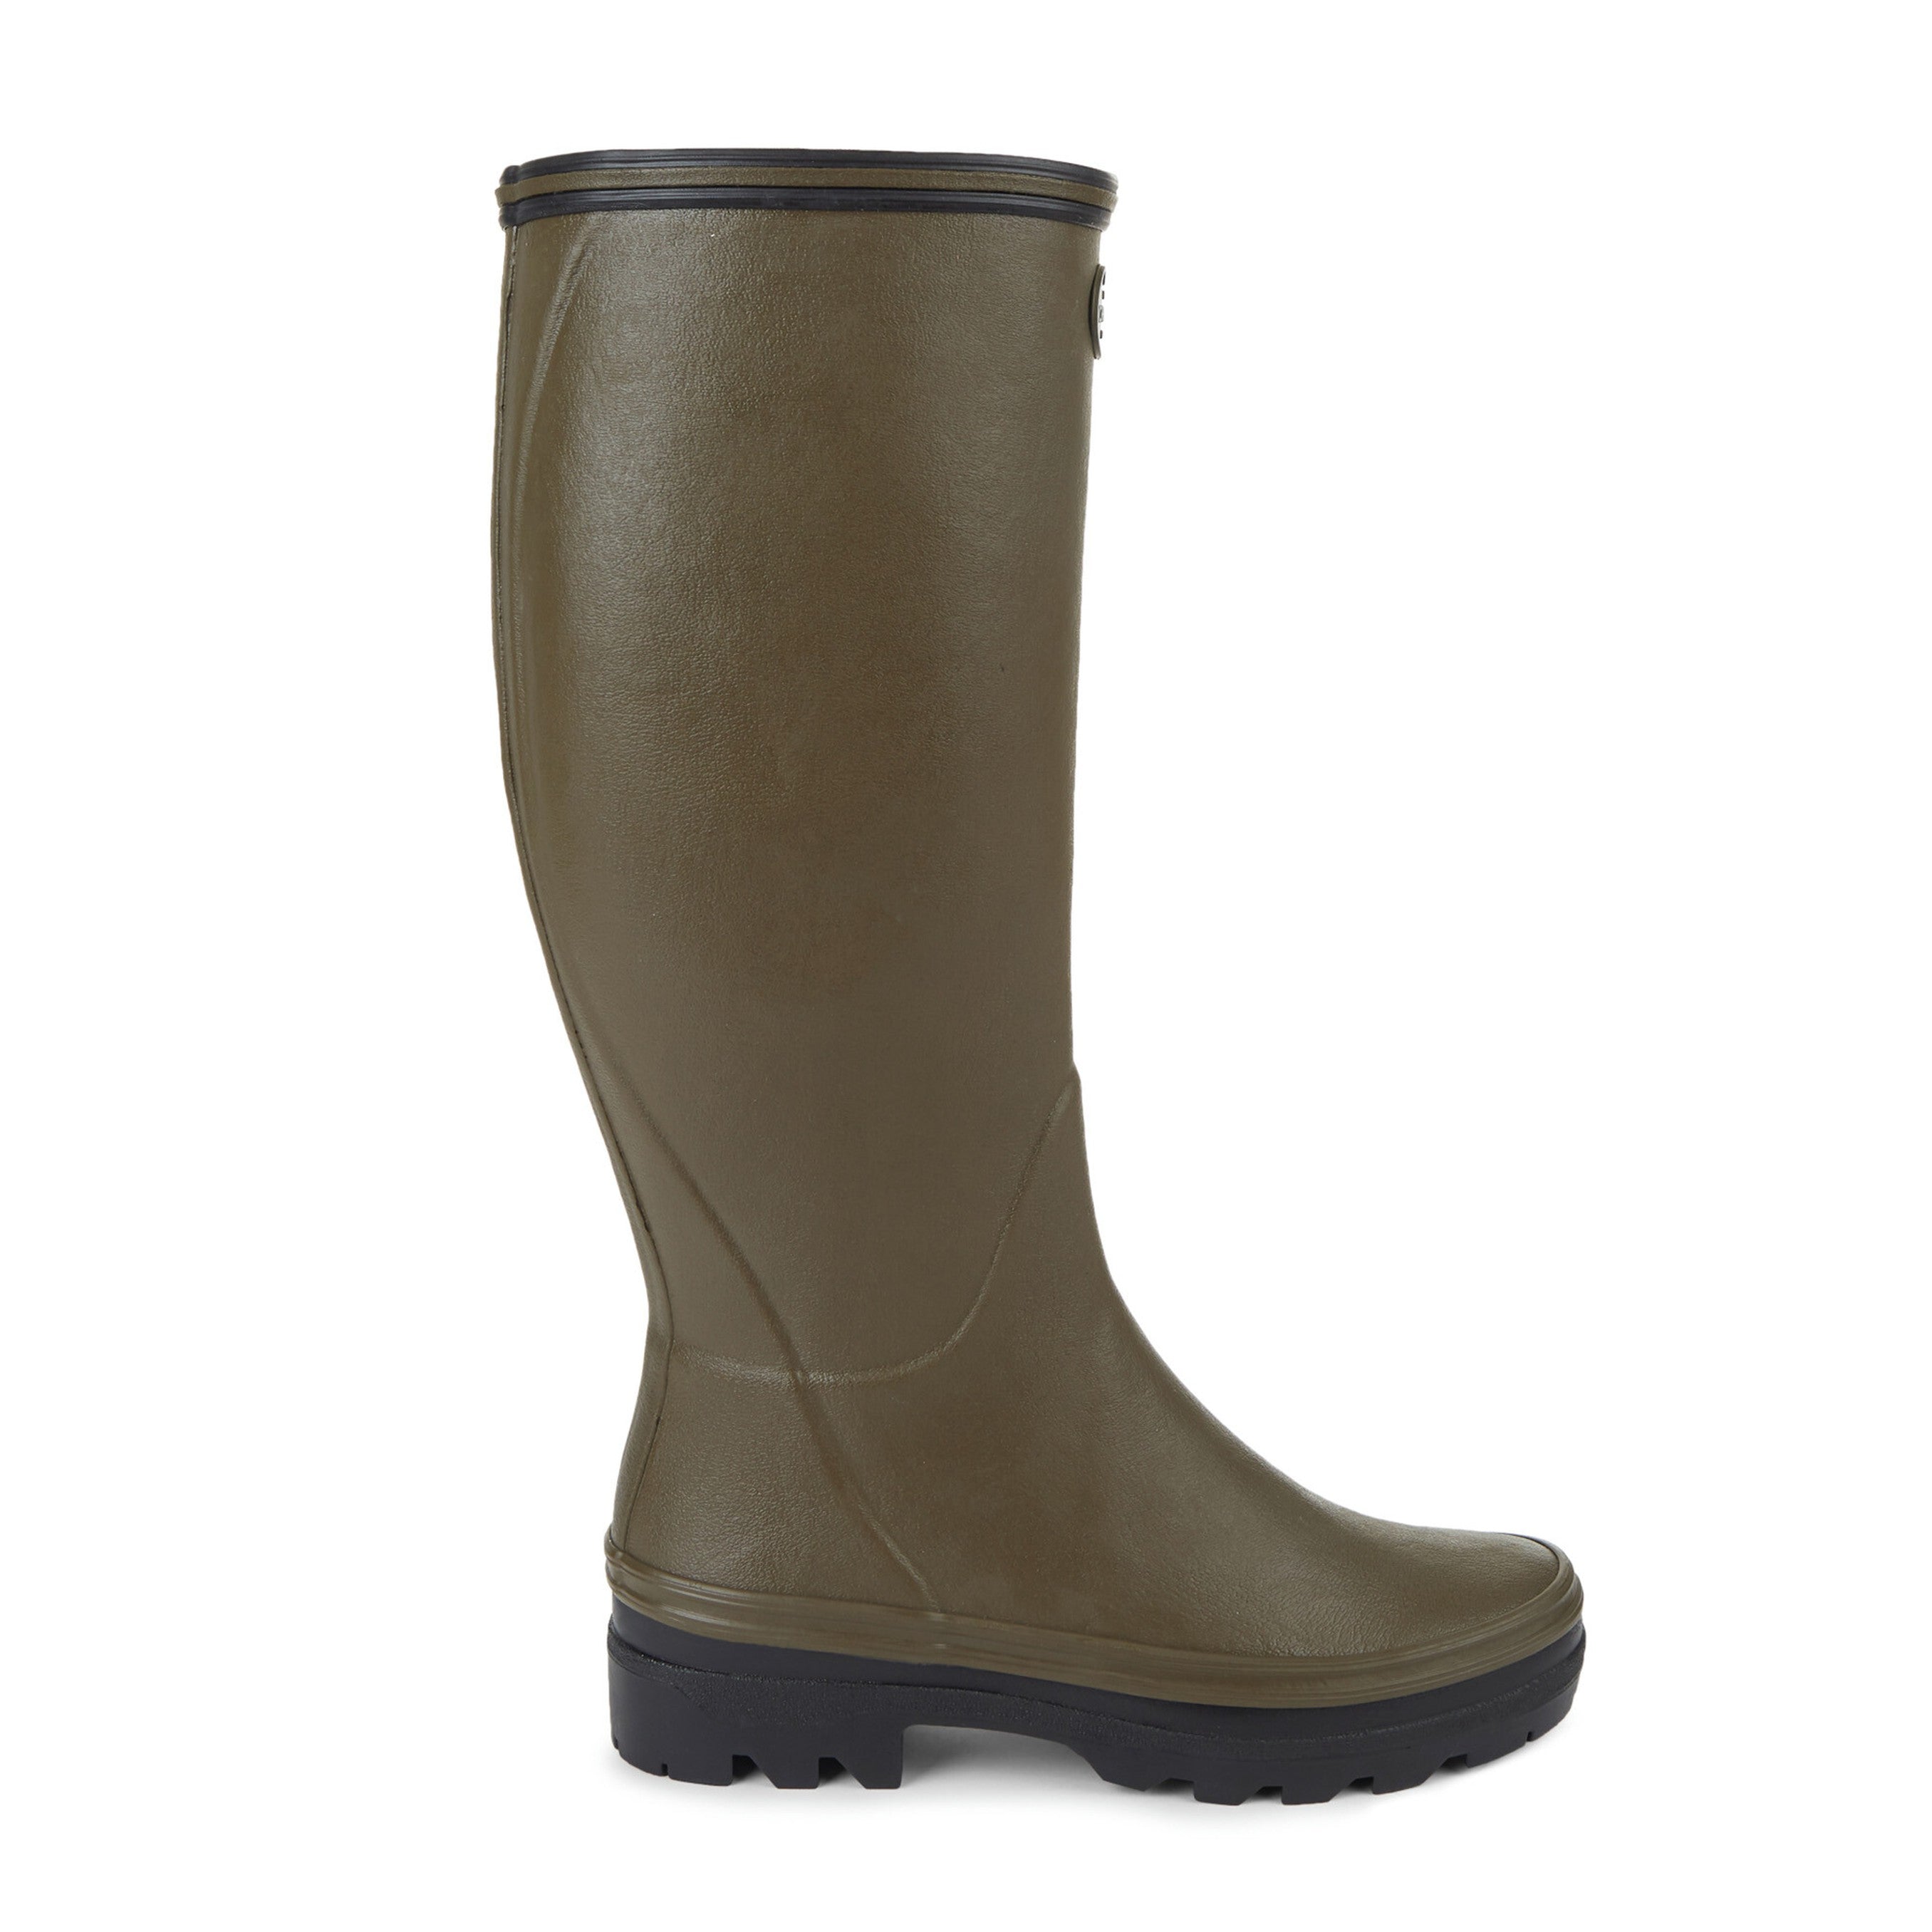 Le Chameau Ladies Giverny Jersey Lined Wellingtons